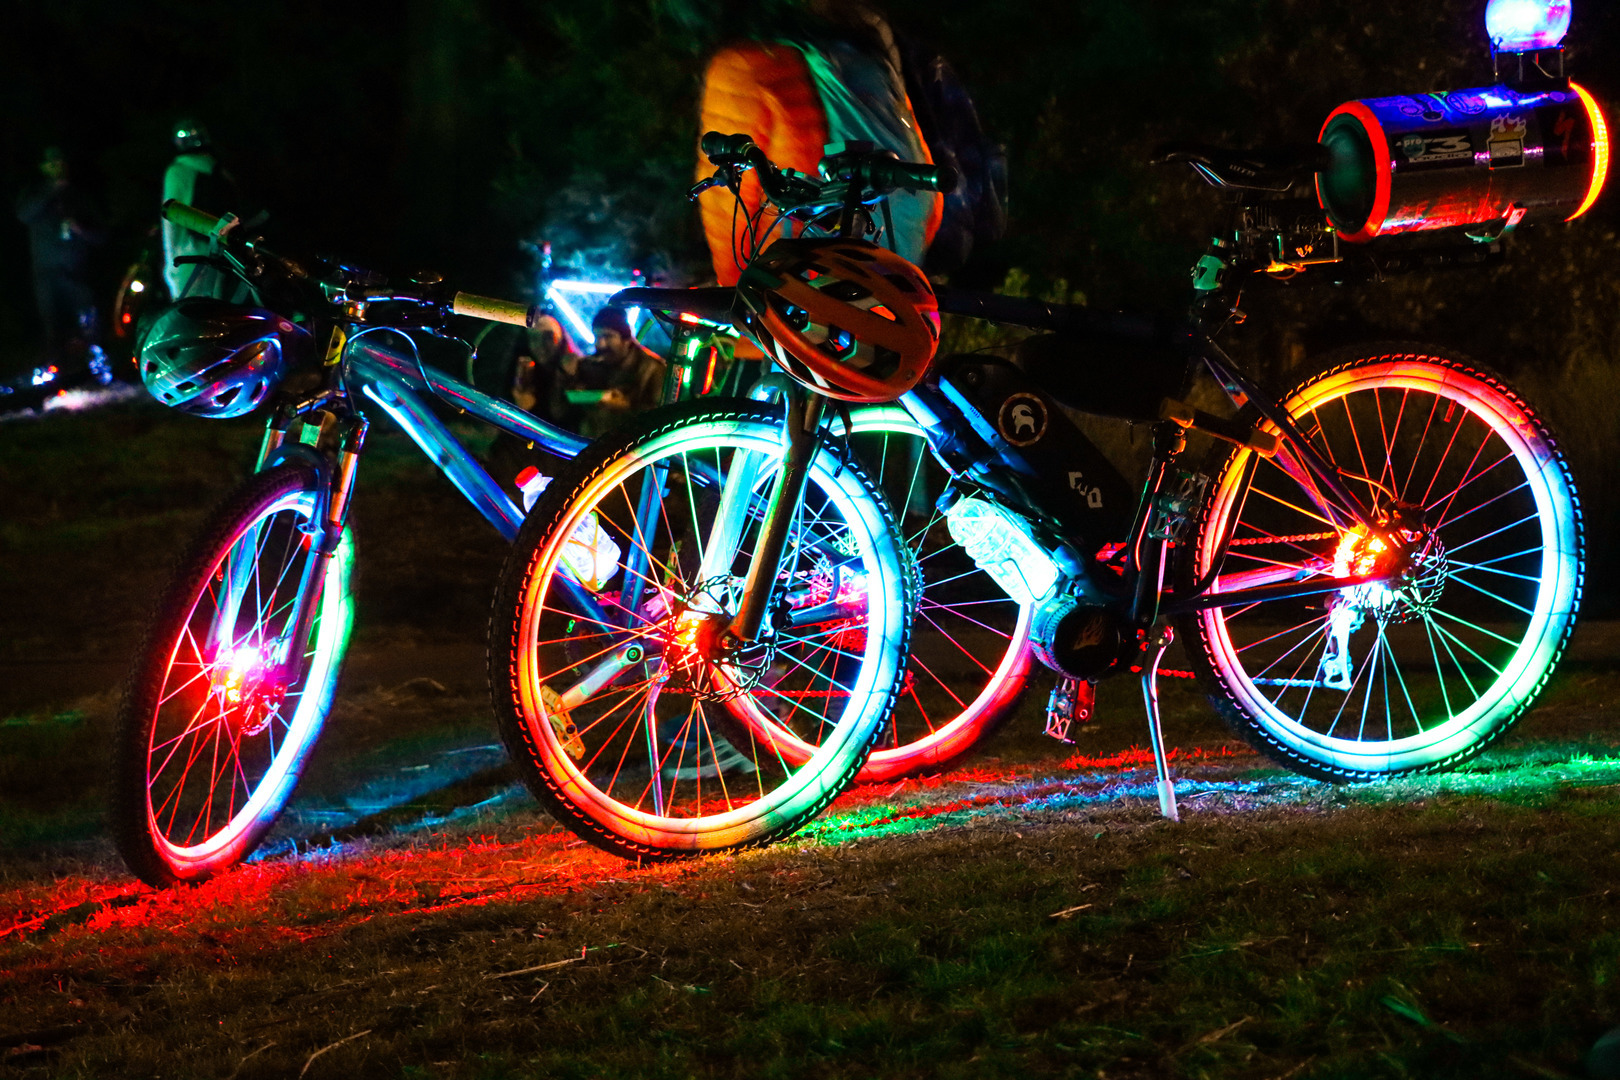 Light Up the Night Bike Parade in Golden Gate Park, San Francisco, California, United States